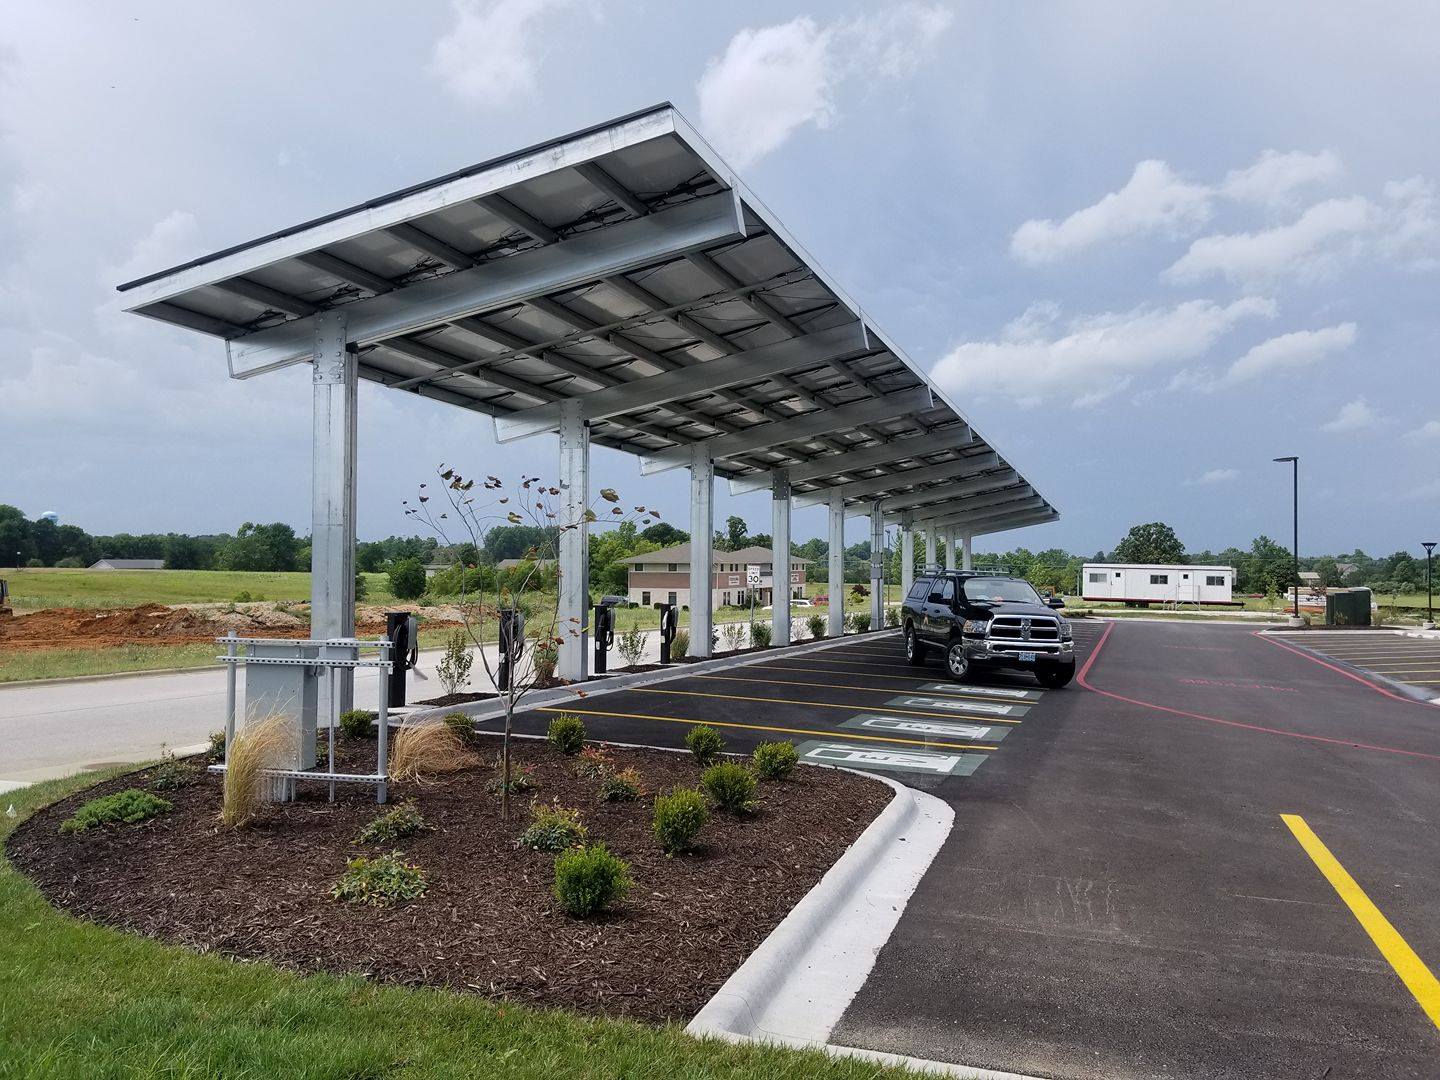 A solar-powered metal carport with electric car charging stations underneath at the Best Western in Bolivar, MO.